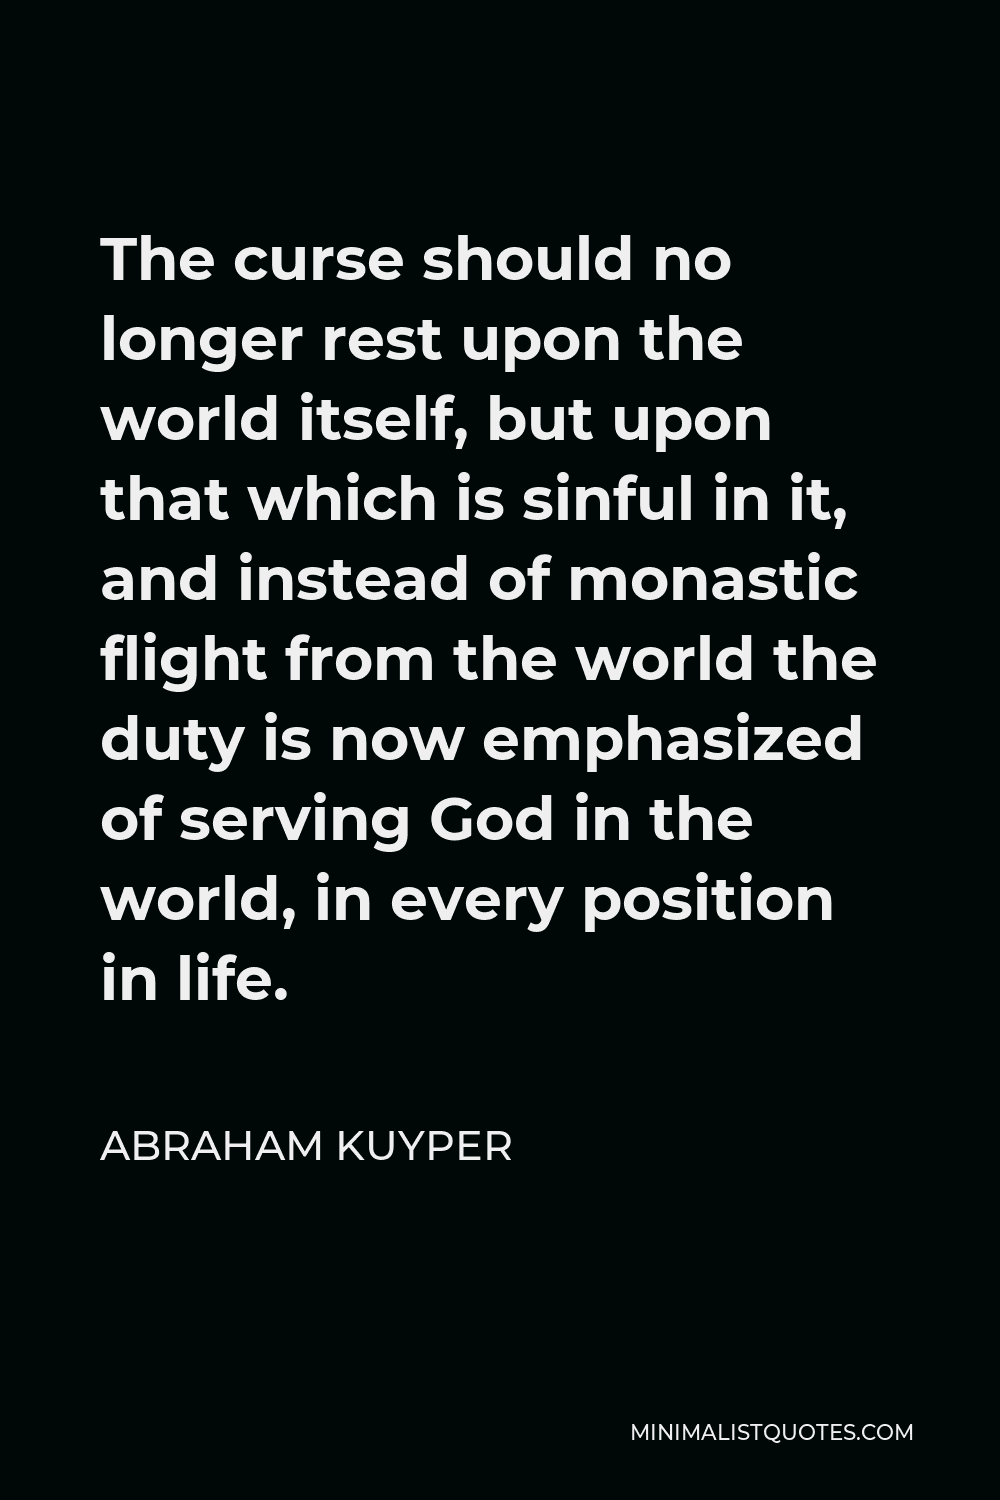 Abraham Kuyper Quote - The curse should no longer rest upon the world itself, but upon that which is sinful in it, and instead of monastic flight from the world the duty is now emphasized of serving God in the world, in every position in life.